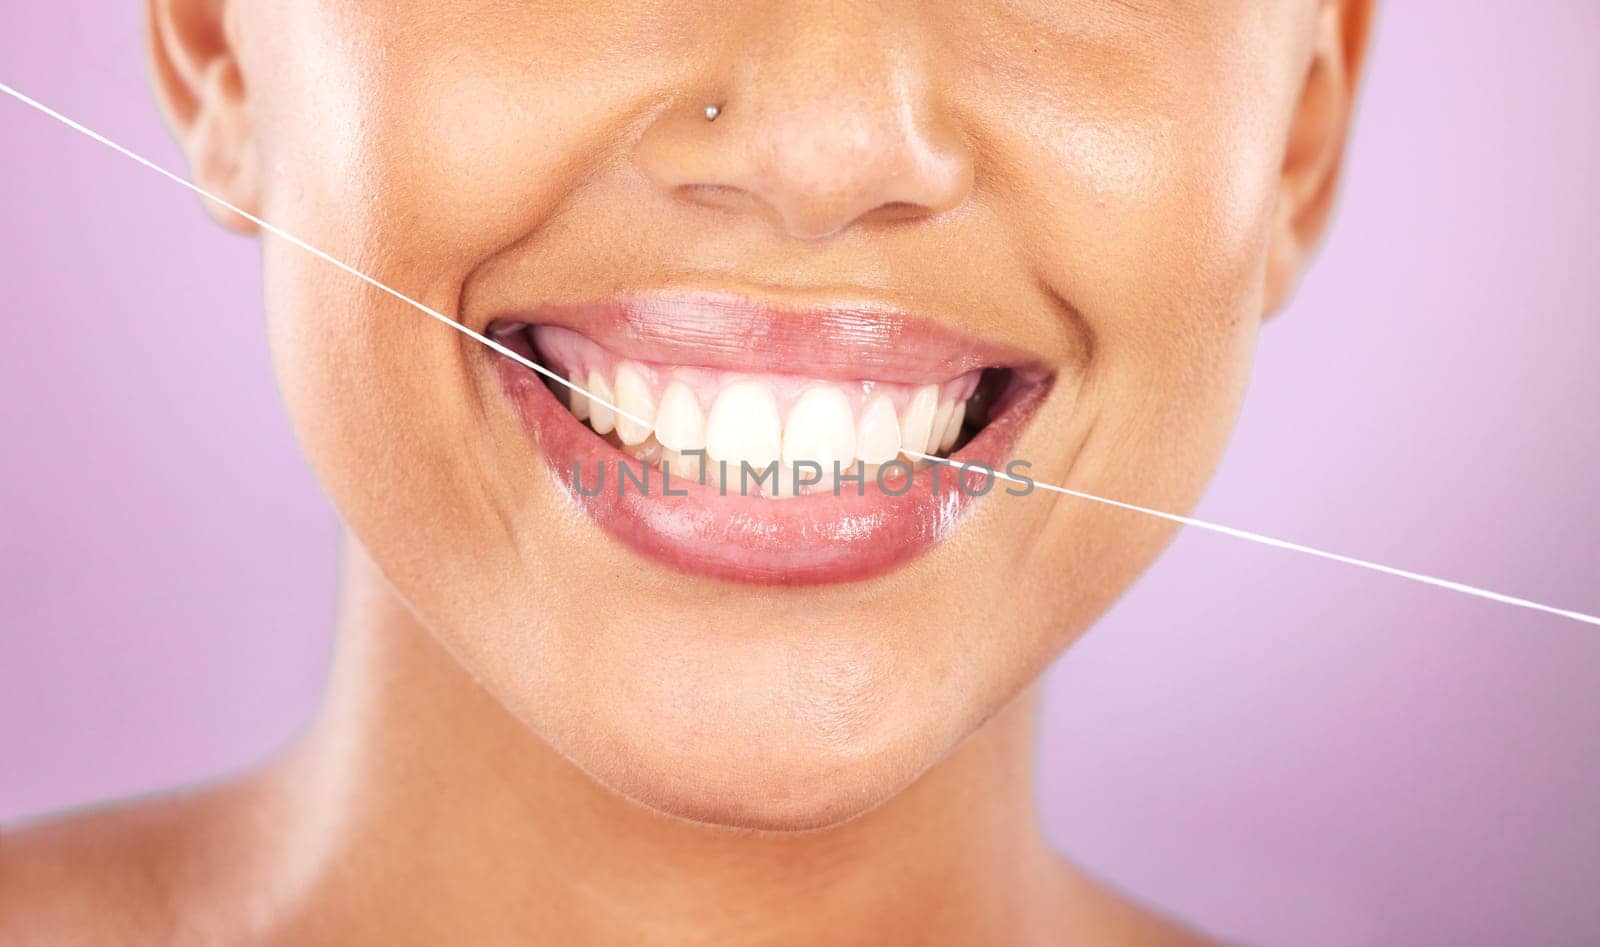 Teeth, dental floss and beauty with woman, face zoom and smile, cosmetic and oral healthcare against purple background. Flossing, fresh breath and health for mouth, teeth whitening with Invisalign. by YuriArcurs